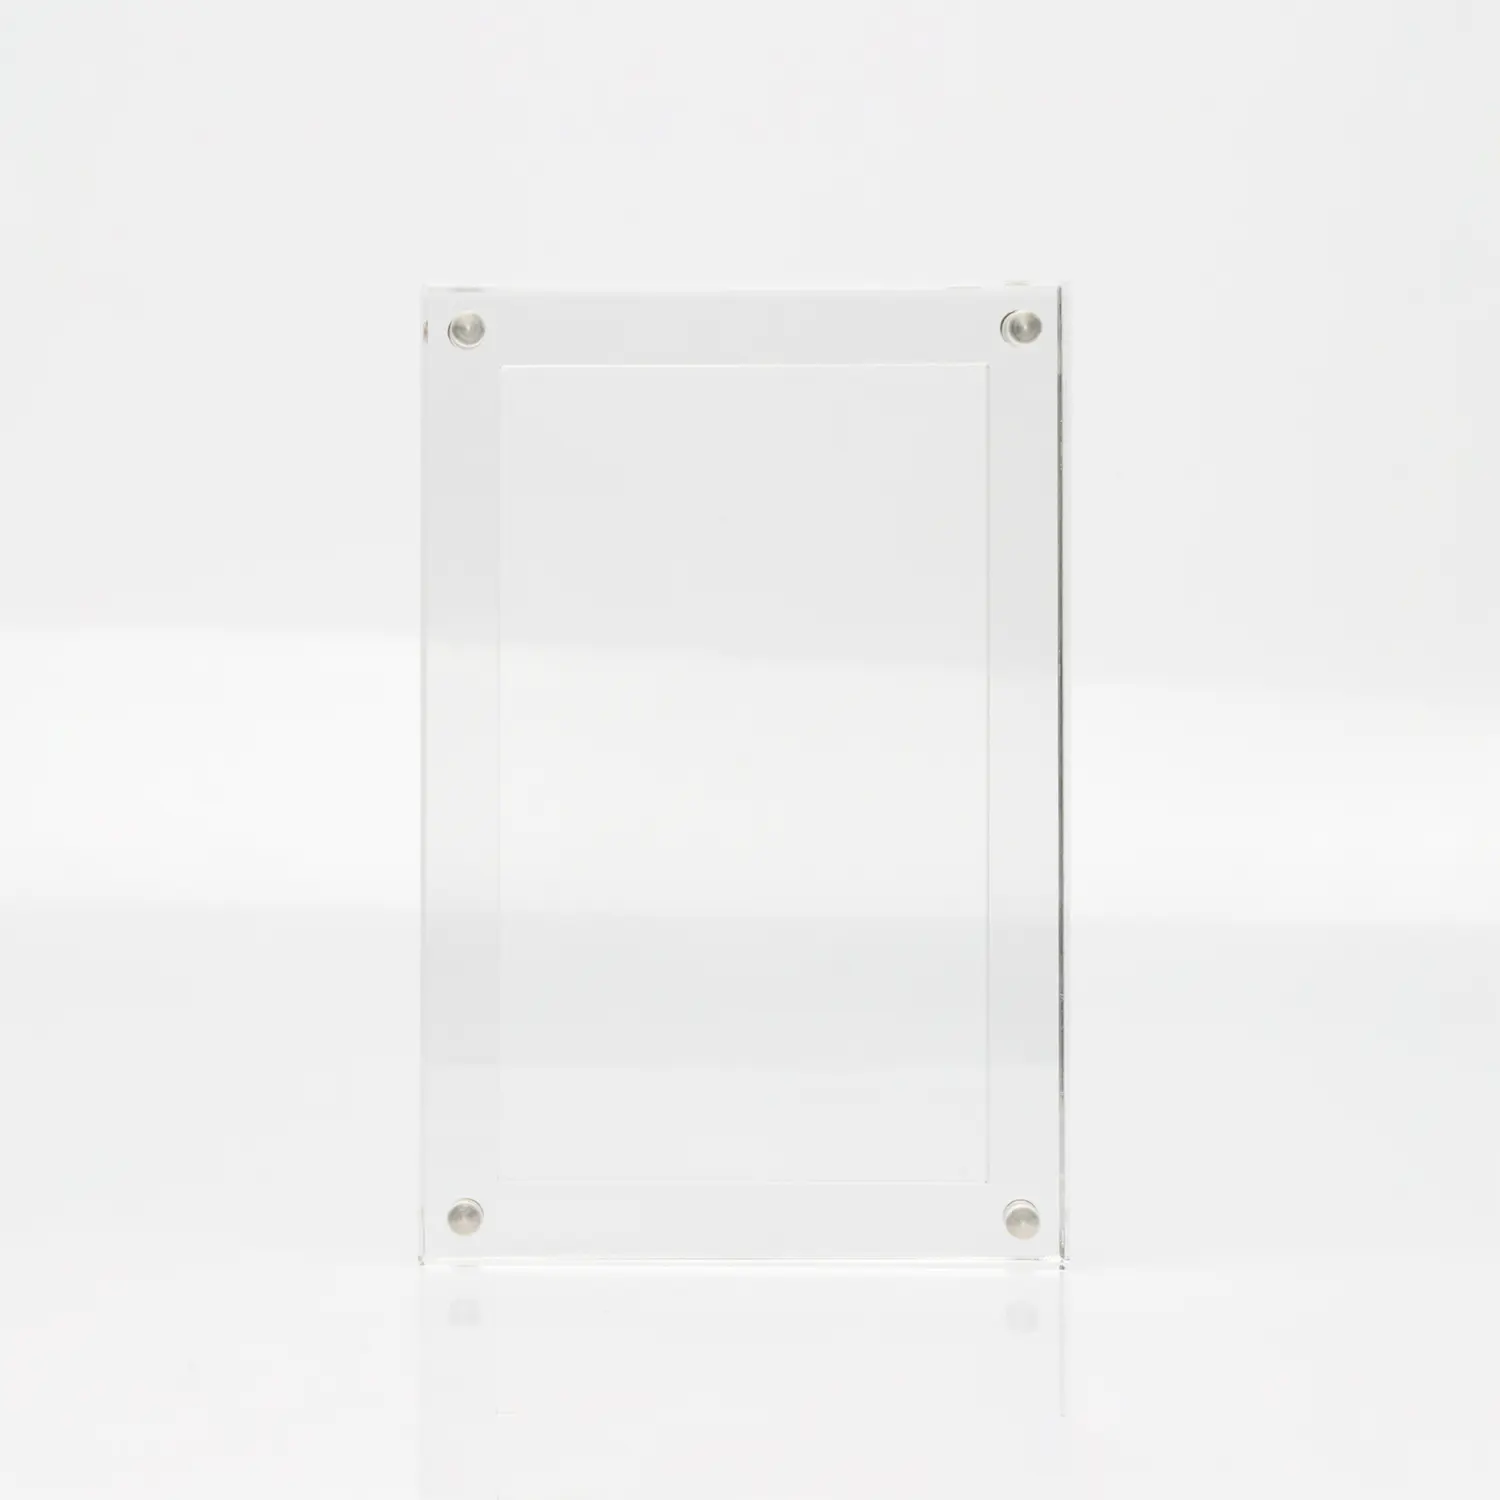 UV-Filtering Graded Slabs Display Stand (PSA And CGC Compatible)